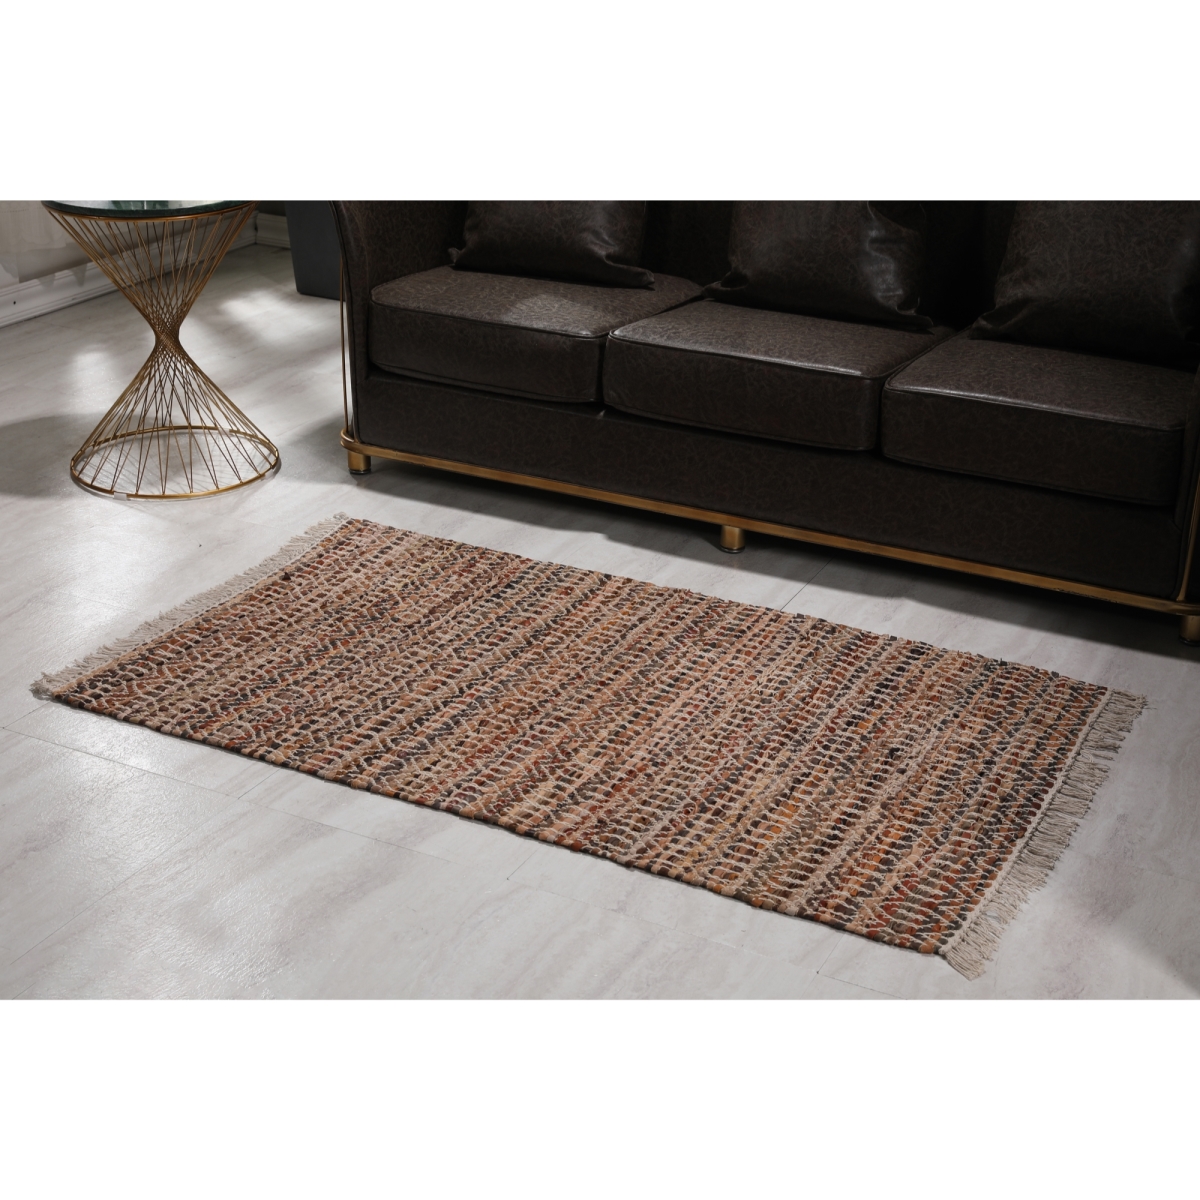 Whtxr640-m 3 X 5 Ft. Handwoven Leather & Cotton Rug, Coffee& White